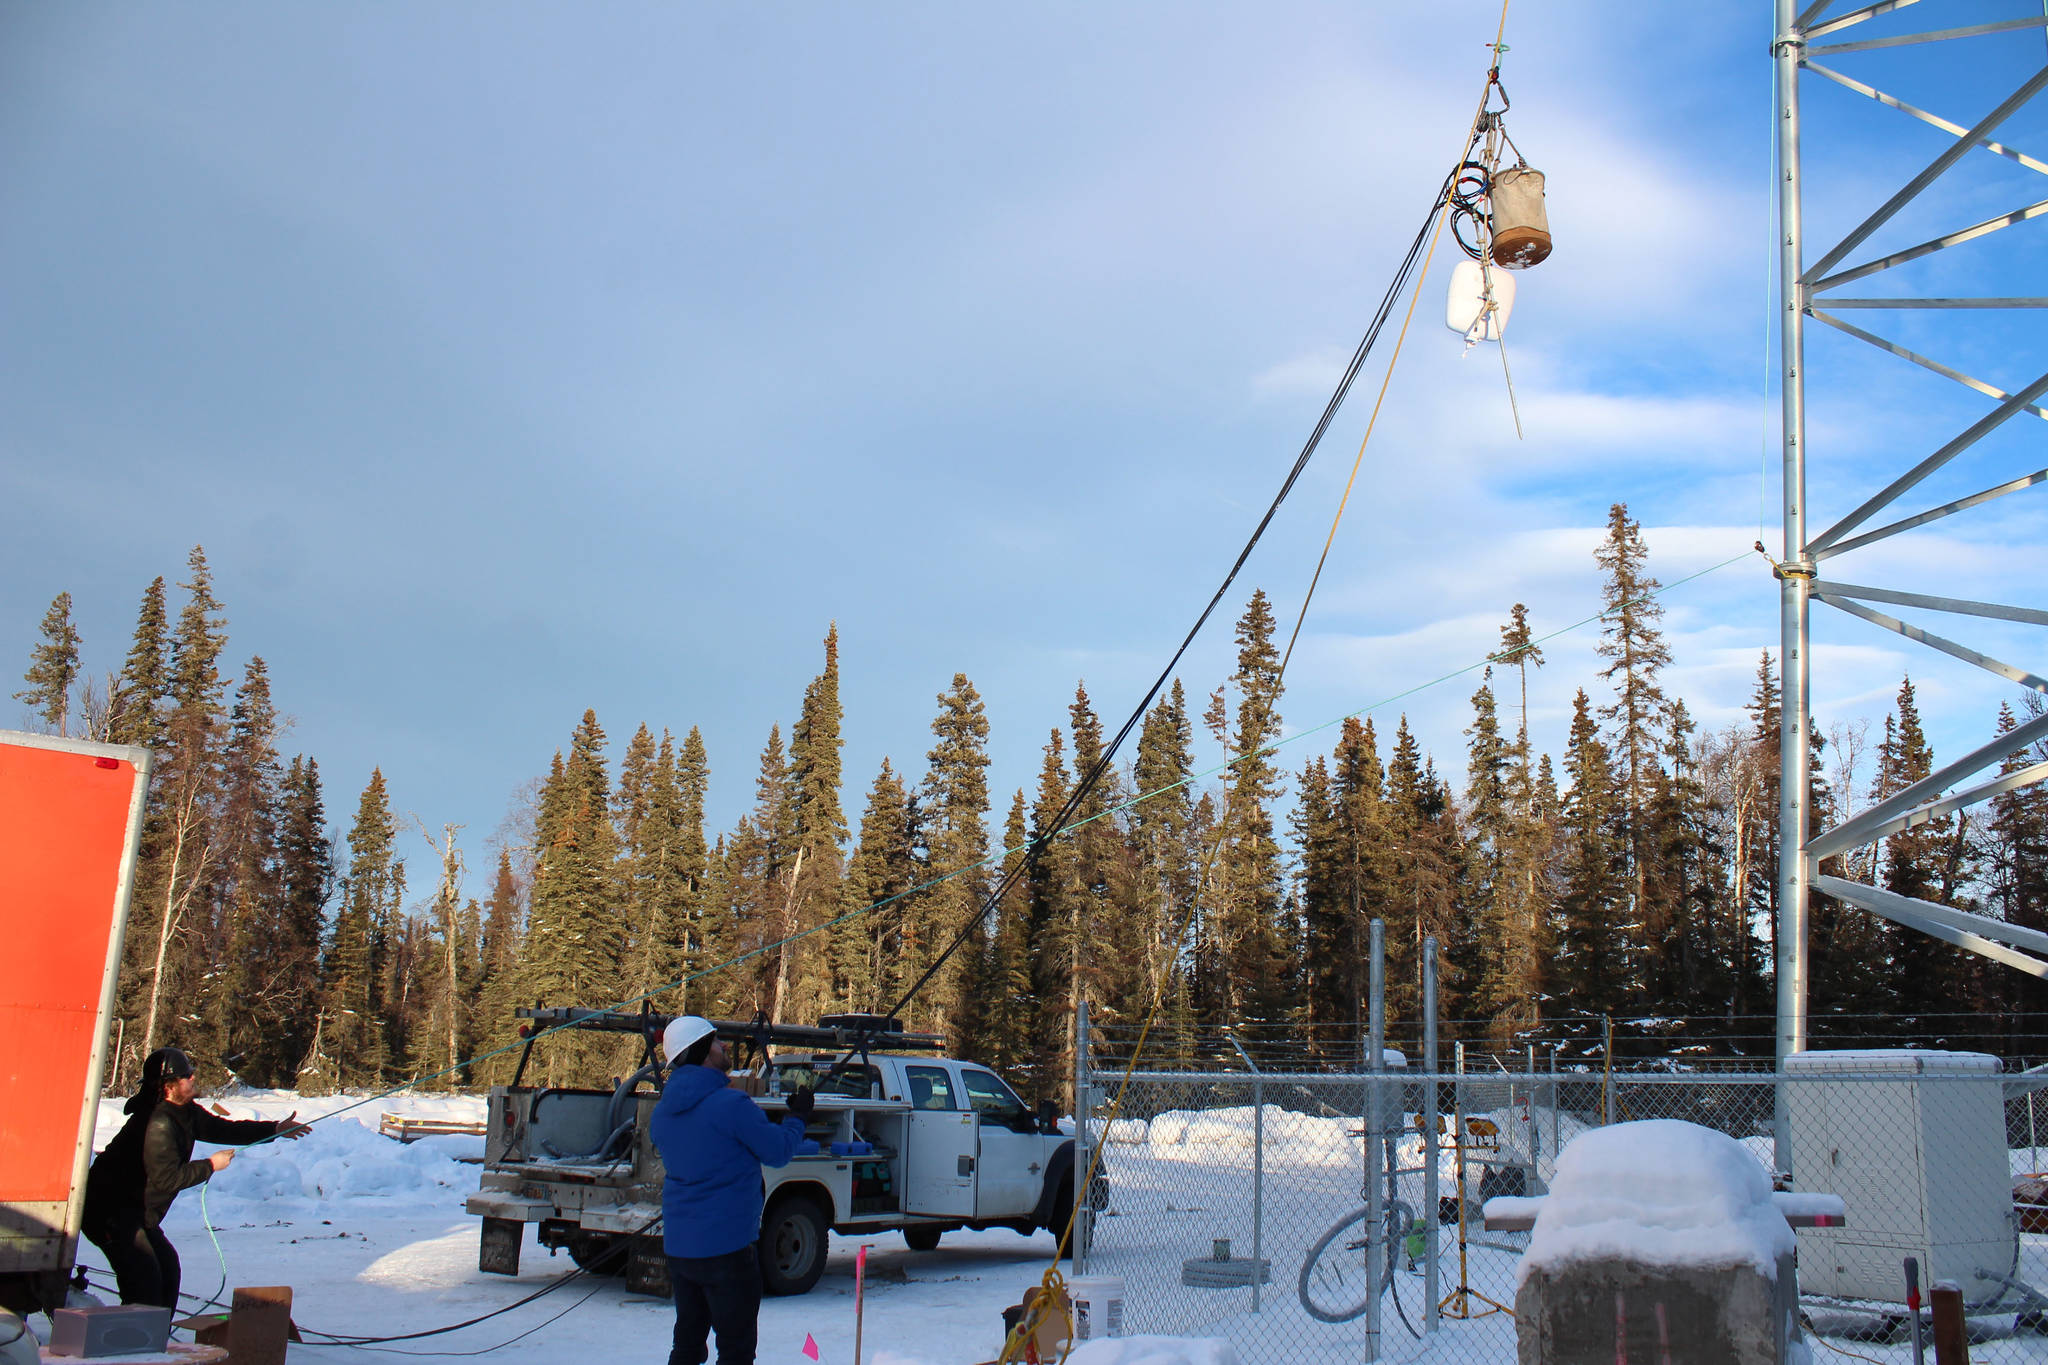 Bryan Stogsdill (left) and McKenzie McCarthy (right) hoist materials to the top of a communications tower on Thursday, Jan. 7 in Nikiski, Alaska. (Ashlyn O’Hara/Peninsula Clarion)